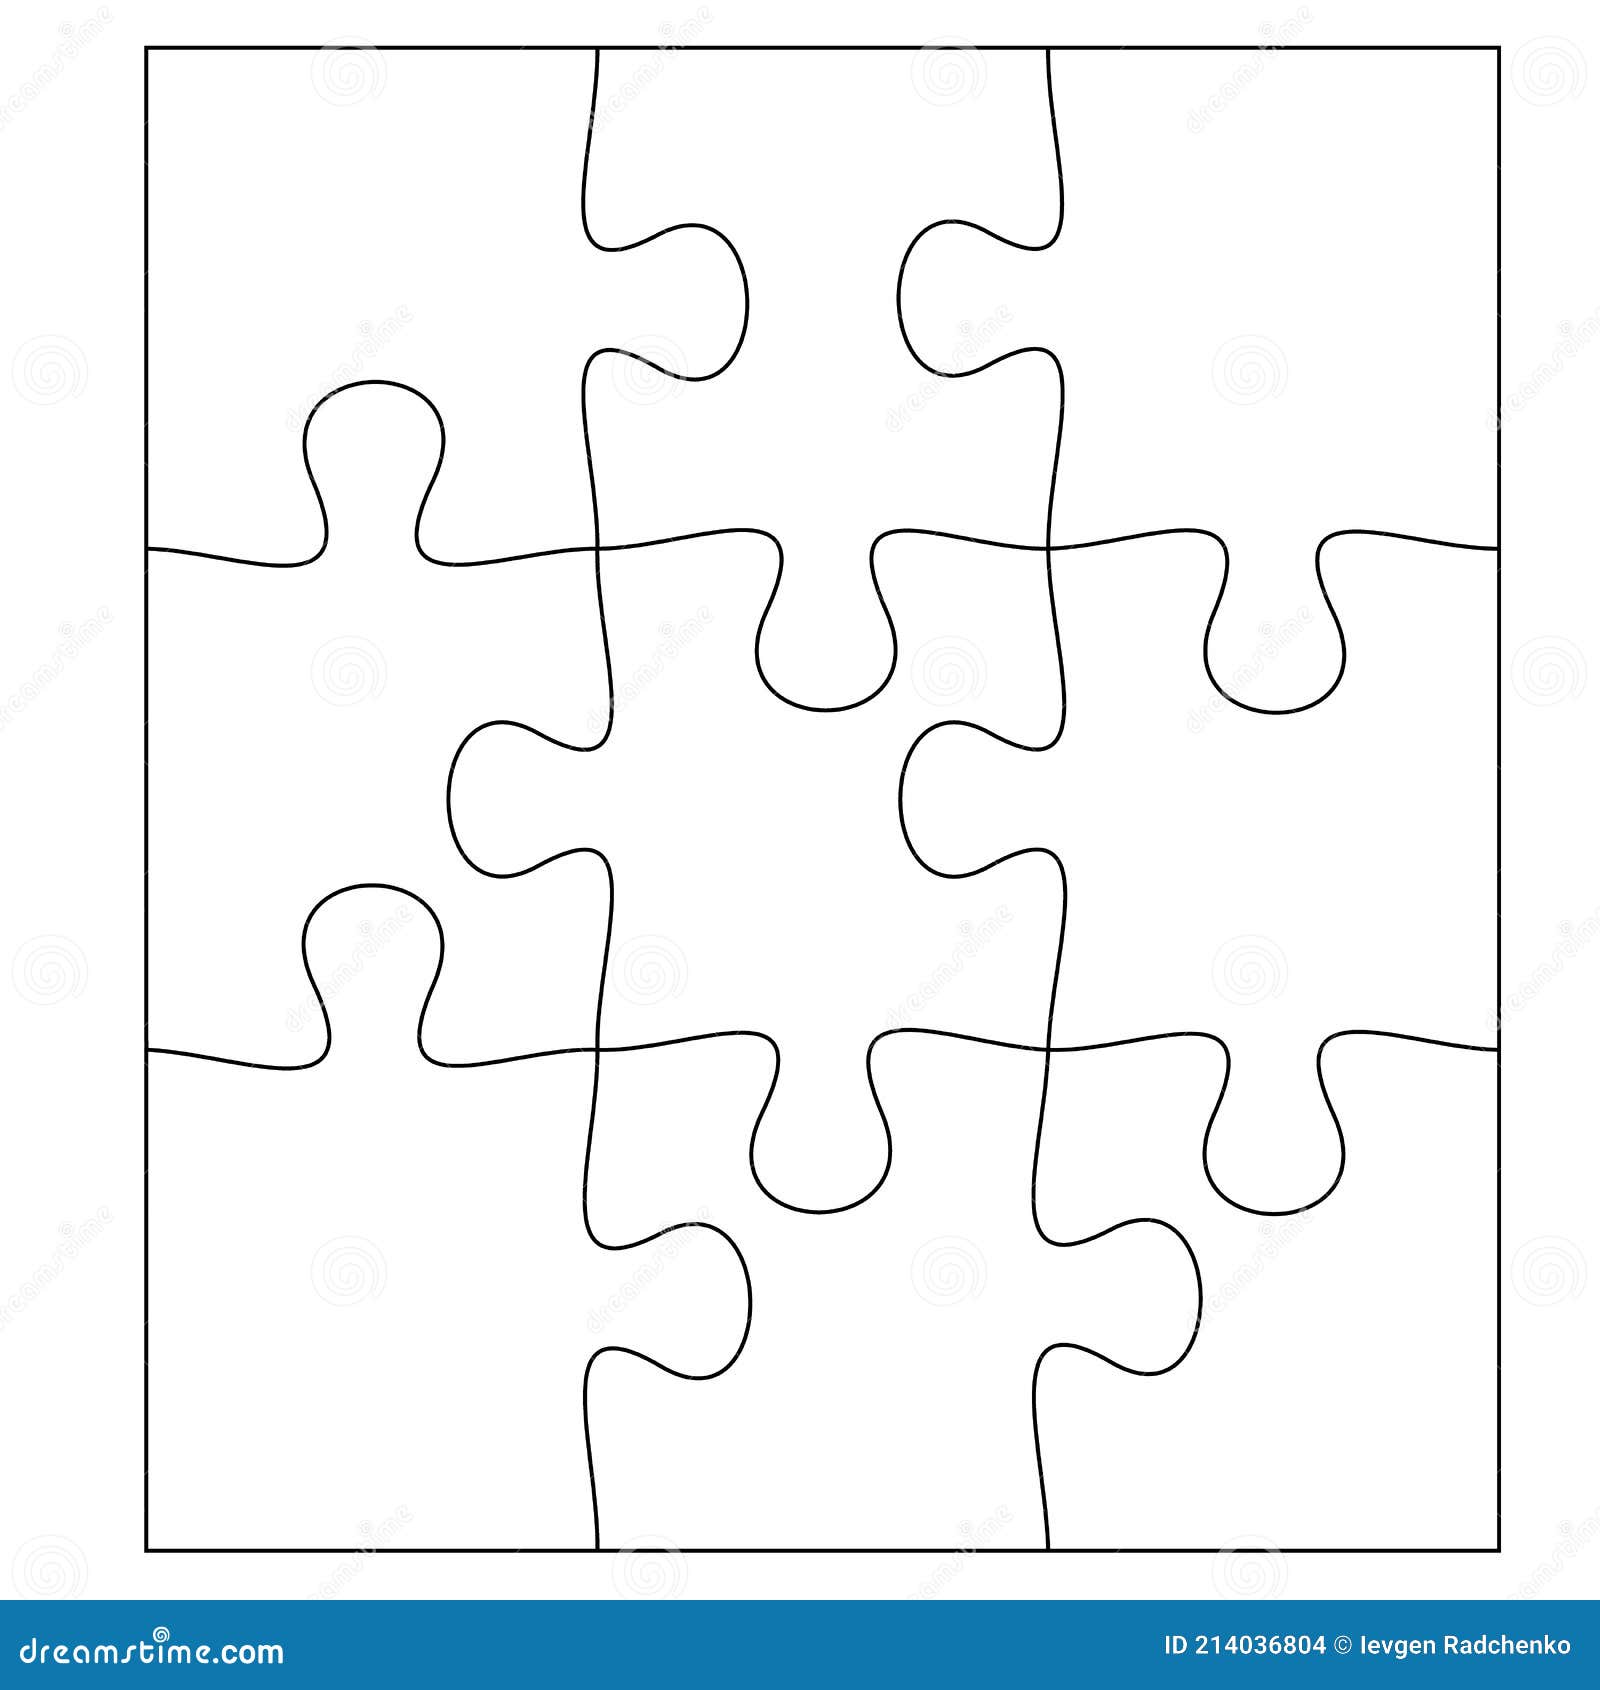 Blank Jigsaw Puzzle 9 Pieces. Simple Line Art Style for Printing and Web. Stock Illustration Stock Vector Illustration of transparent, background: 214036804